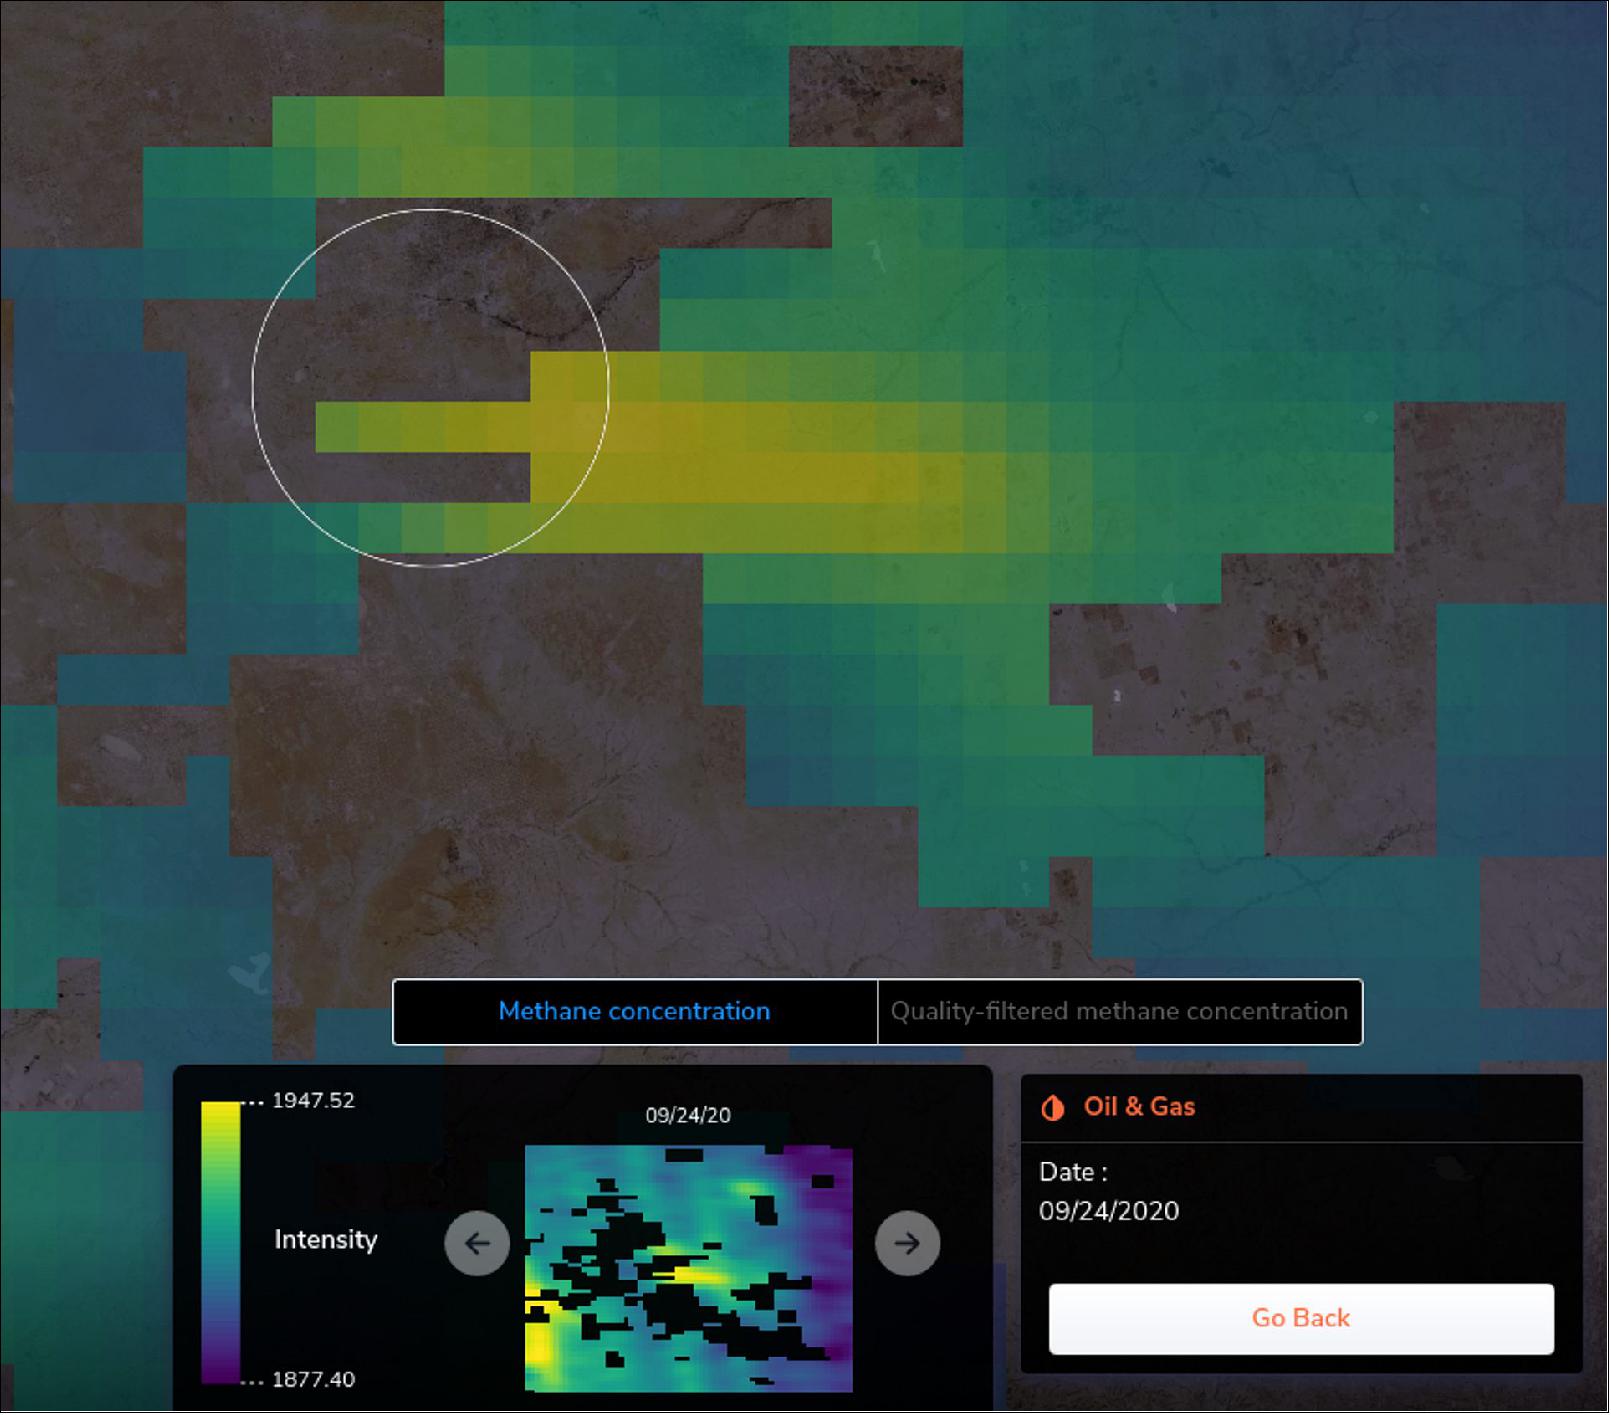 Figure 43: The image shows the methane cloud as detected by Copernicus Sentinel-5P on 24 September 2020 (image credit: ESA, the image contains modified Copernicus data (2020), processed by Kayrros)